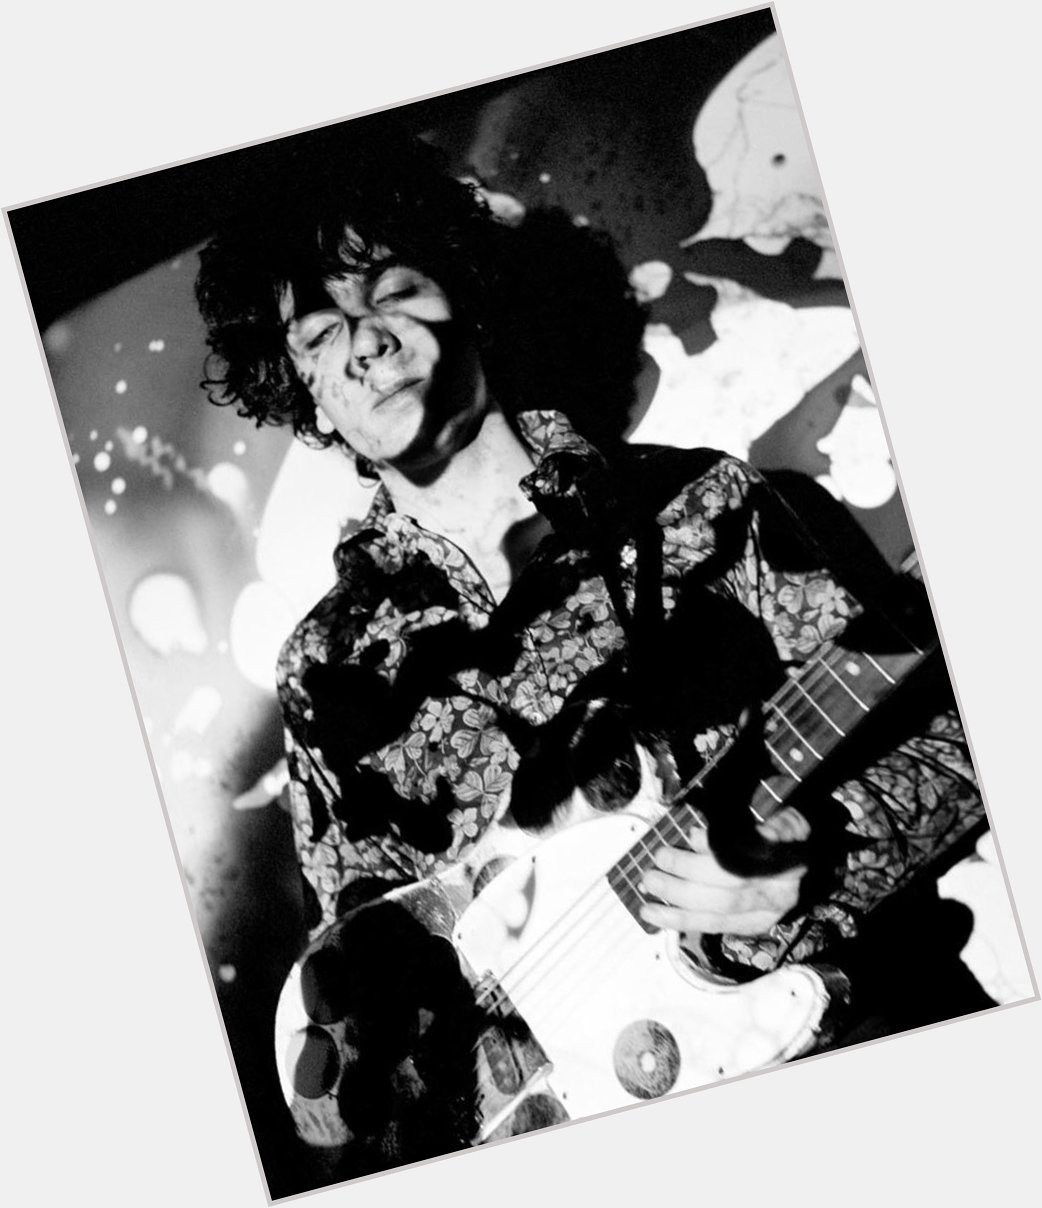 Thinking of syd barrett and how his works were so ahead of their time. happy birthday, crazy diamond. shine on  